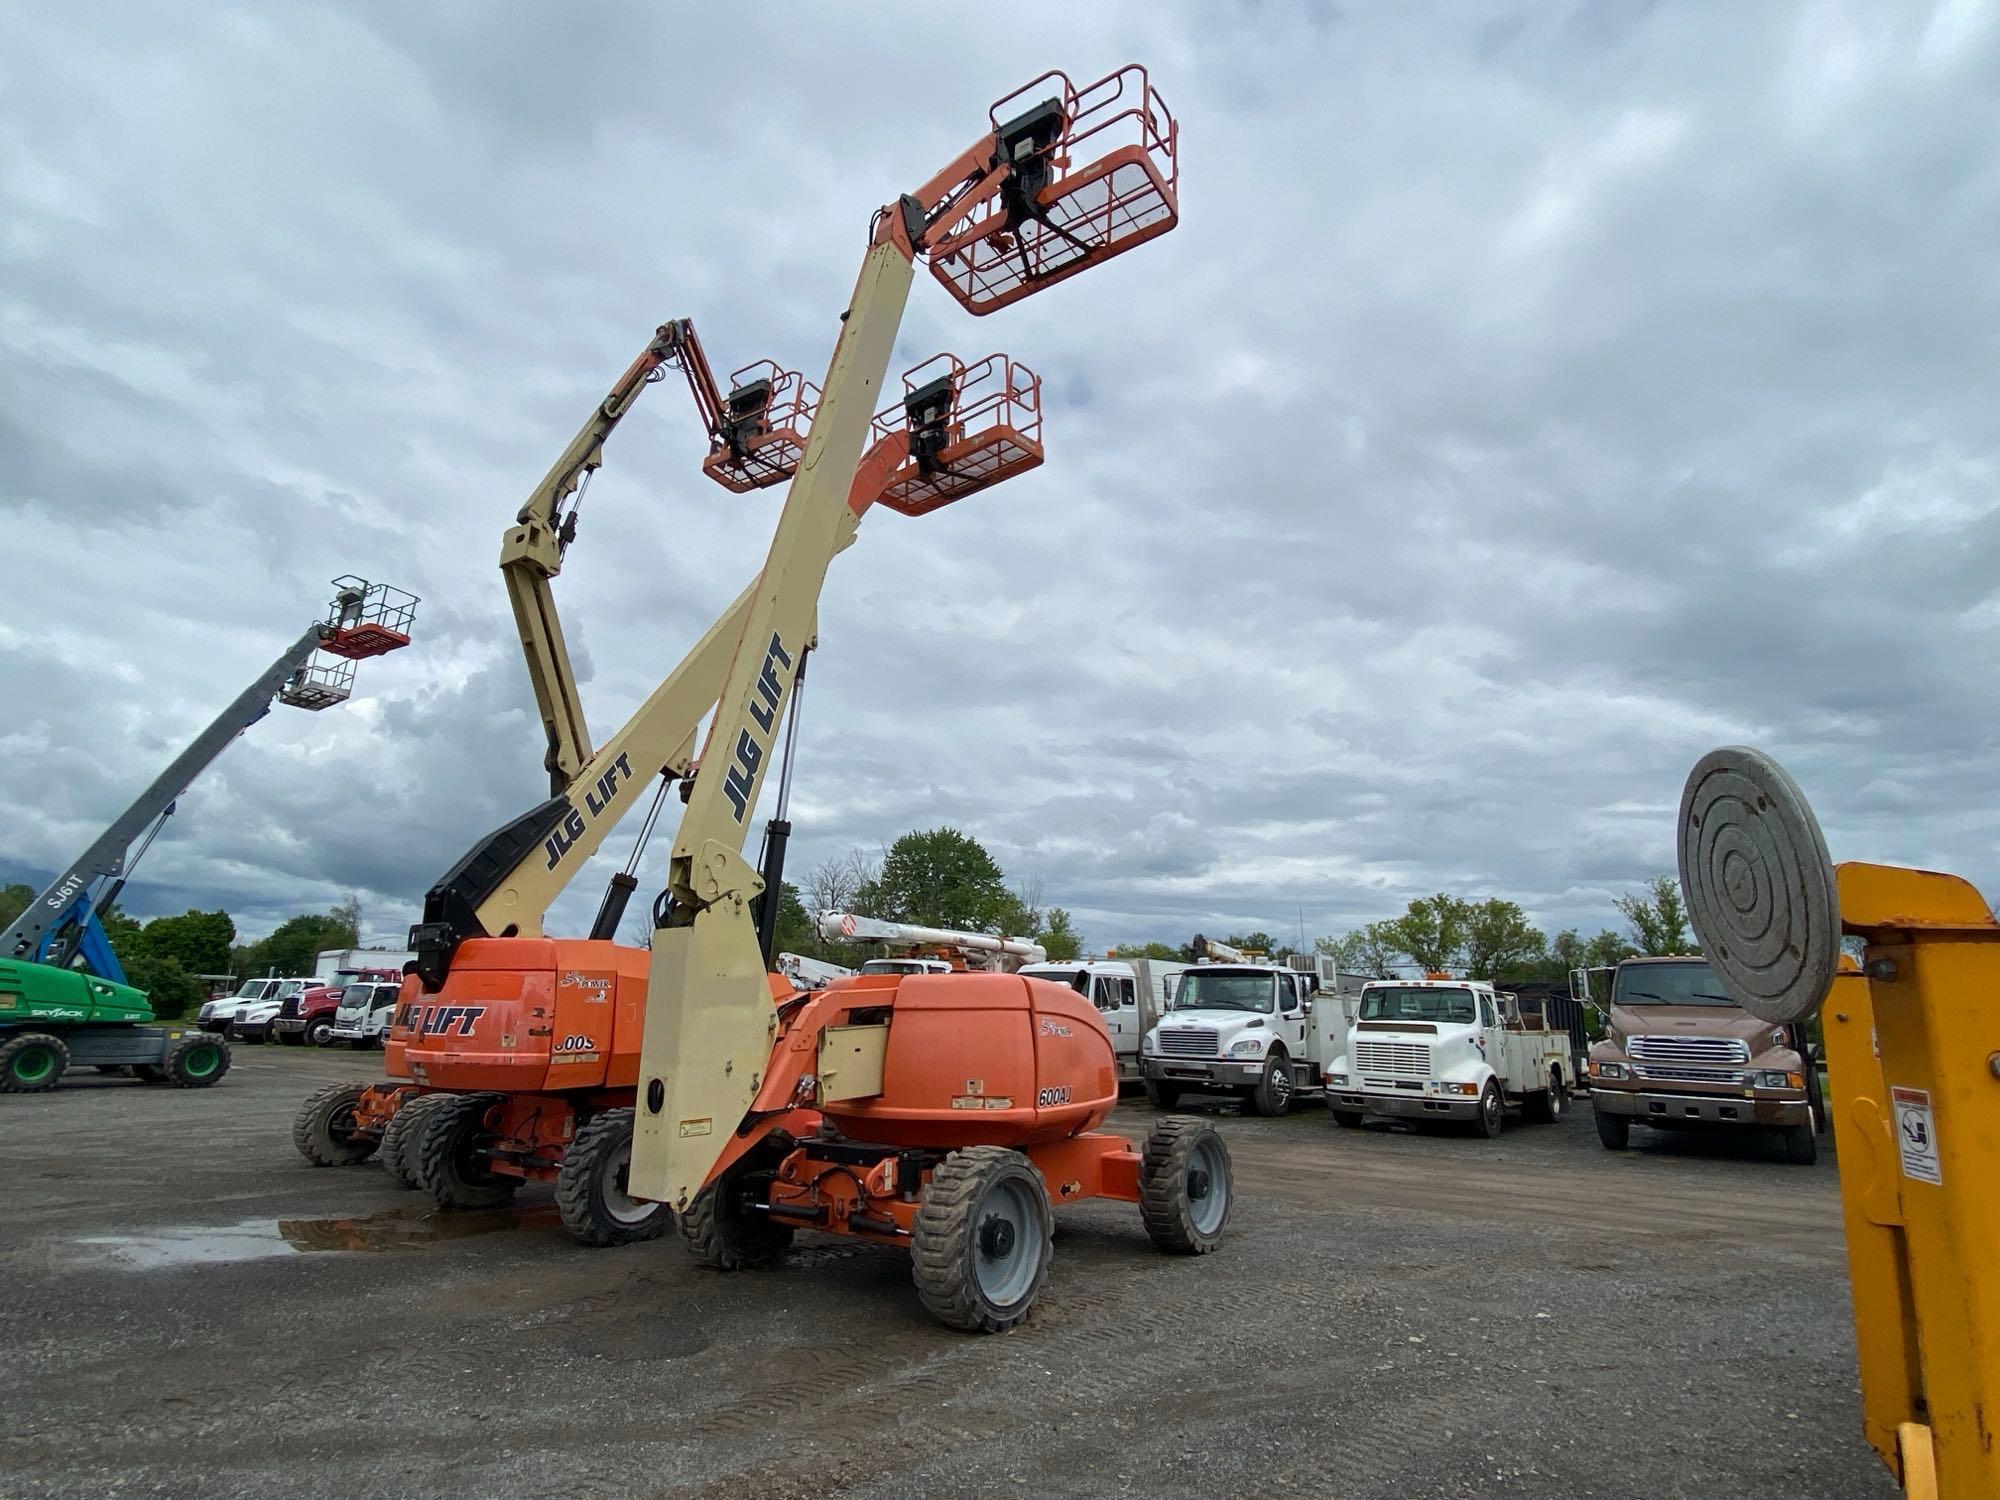 JLG 600AJ BOOM LIFT SN:76841 4x4, powered by diesel engine, equipped with 60ft. Platform height,